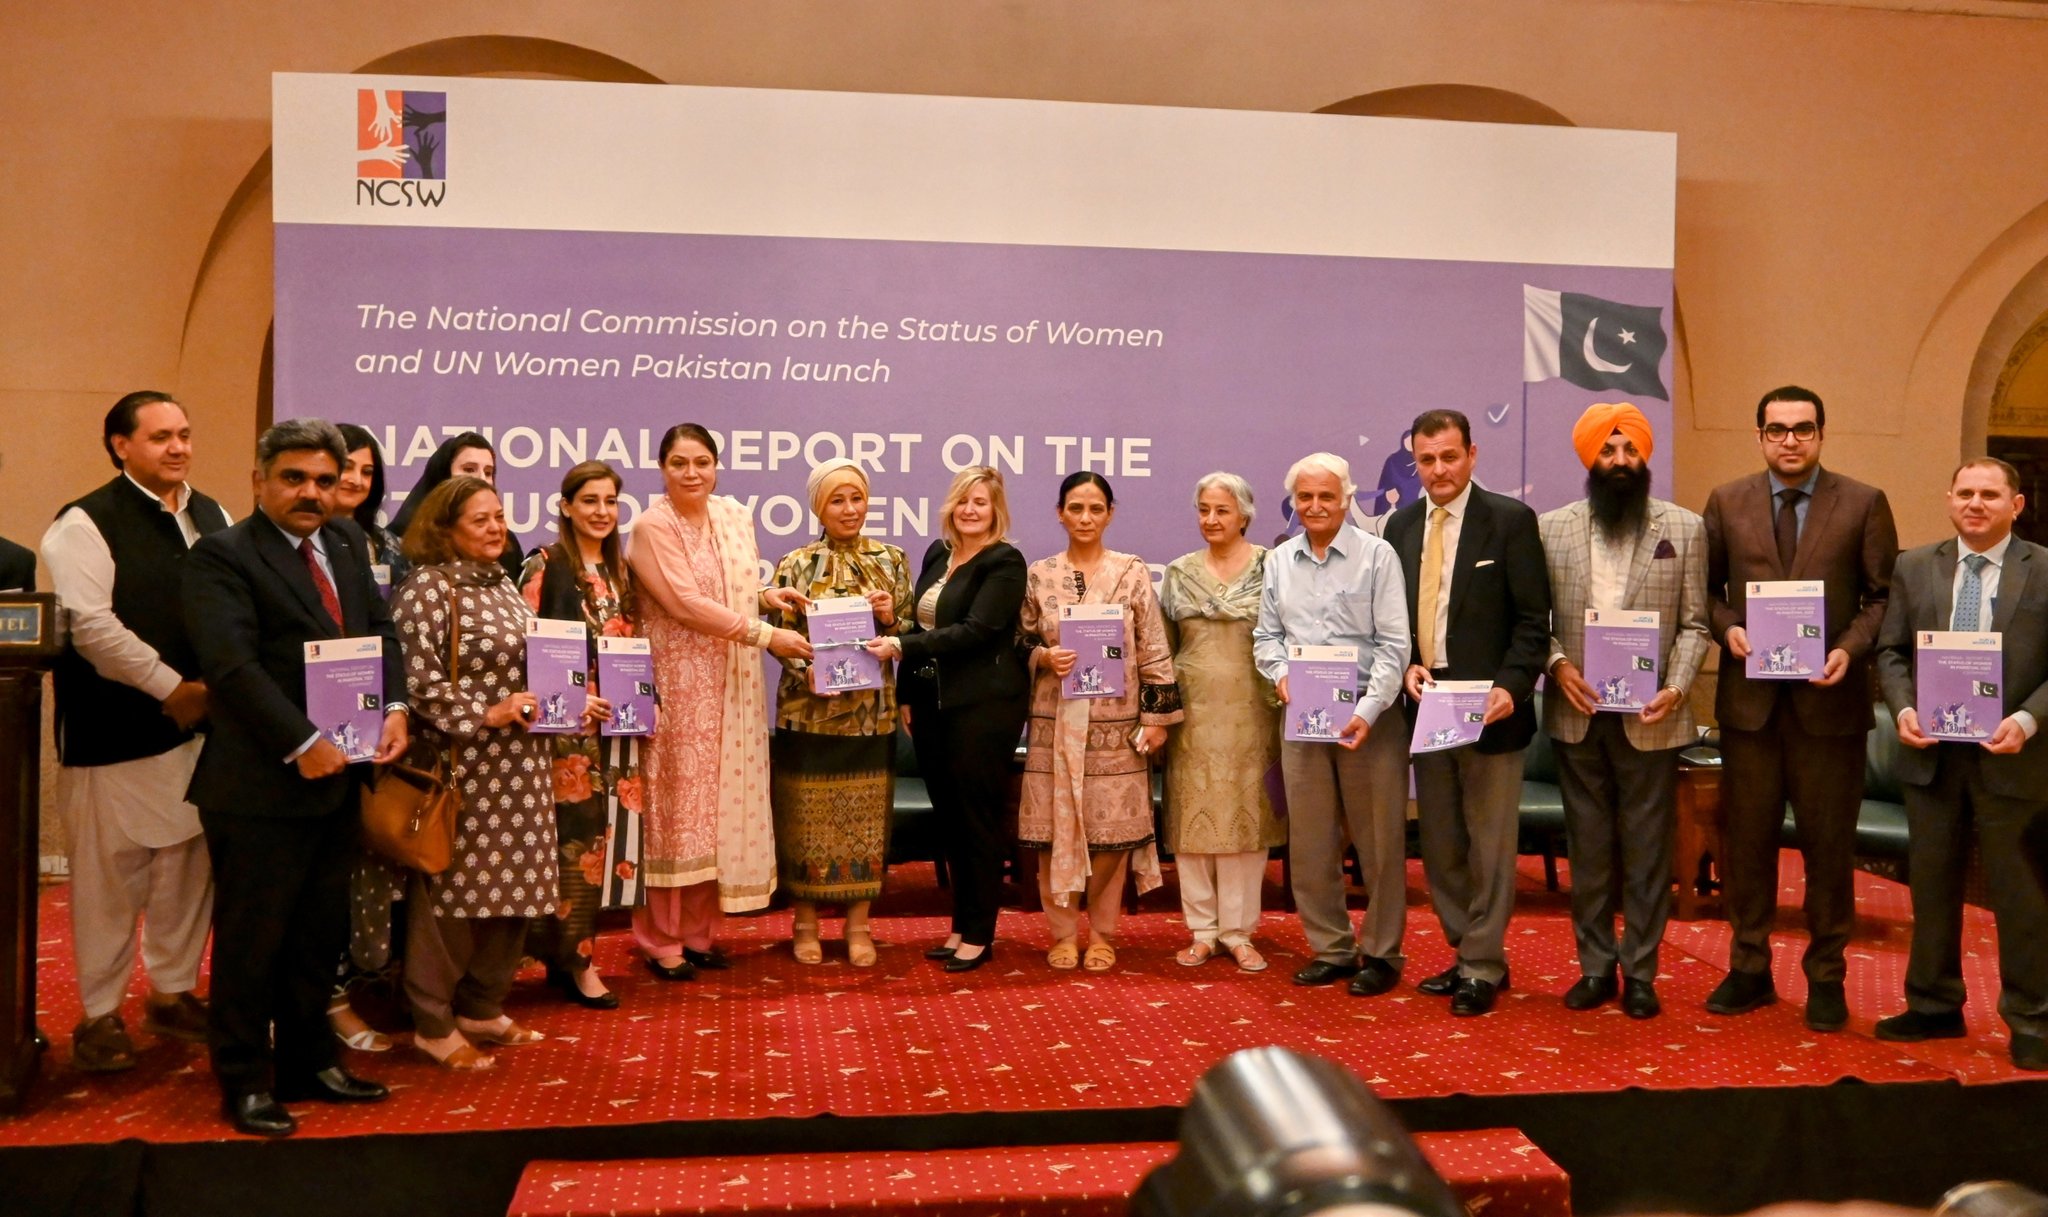 Participants pose for a group photo at the launch ceremony of National Report on the Status of Women in Pakistan. 